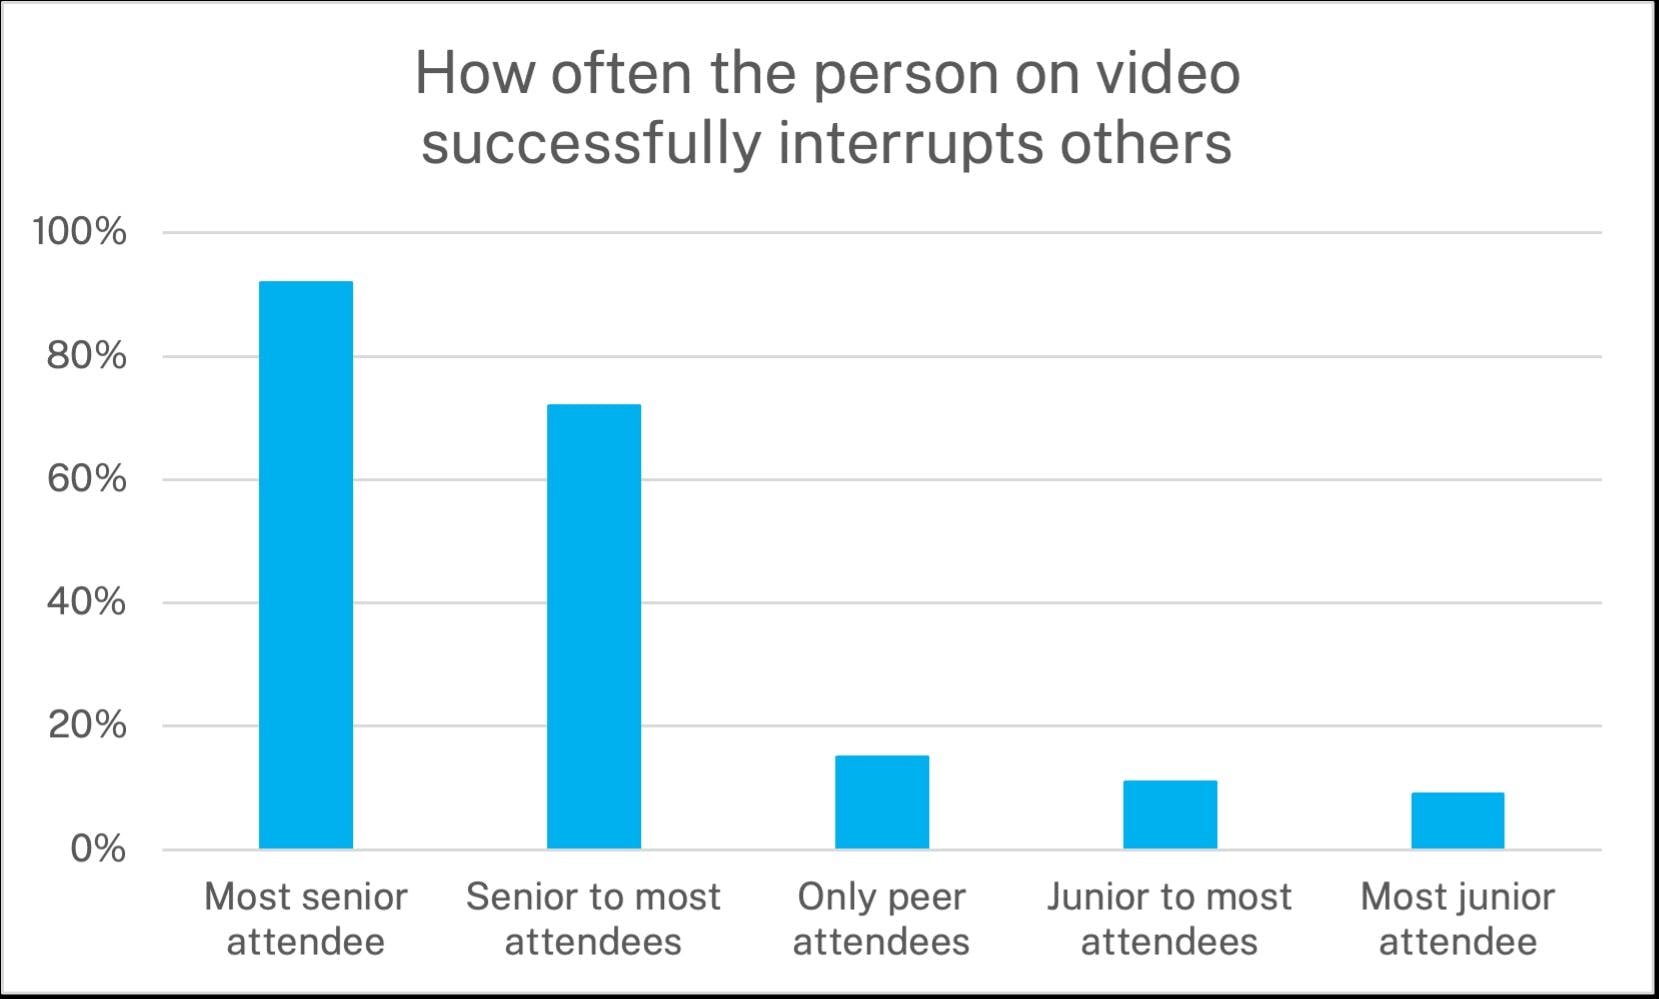 Chart showing how often the person on video successfully interrupts others: Most senior attendee	92% Senior to most attendees	72% Only peer attendees	15% Junior to most attendees	11% Most junior attendee	9%